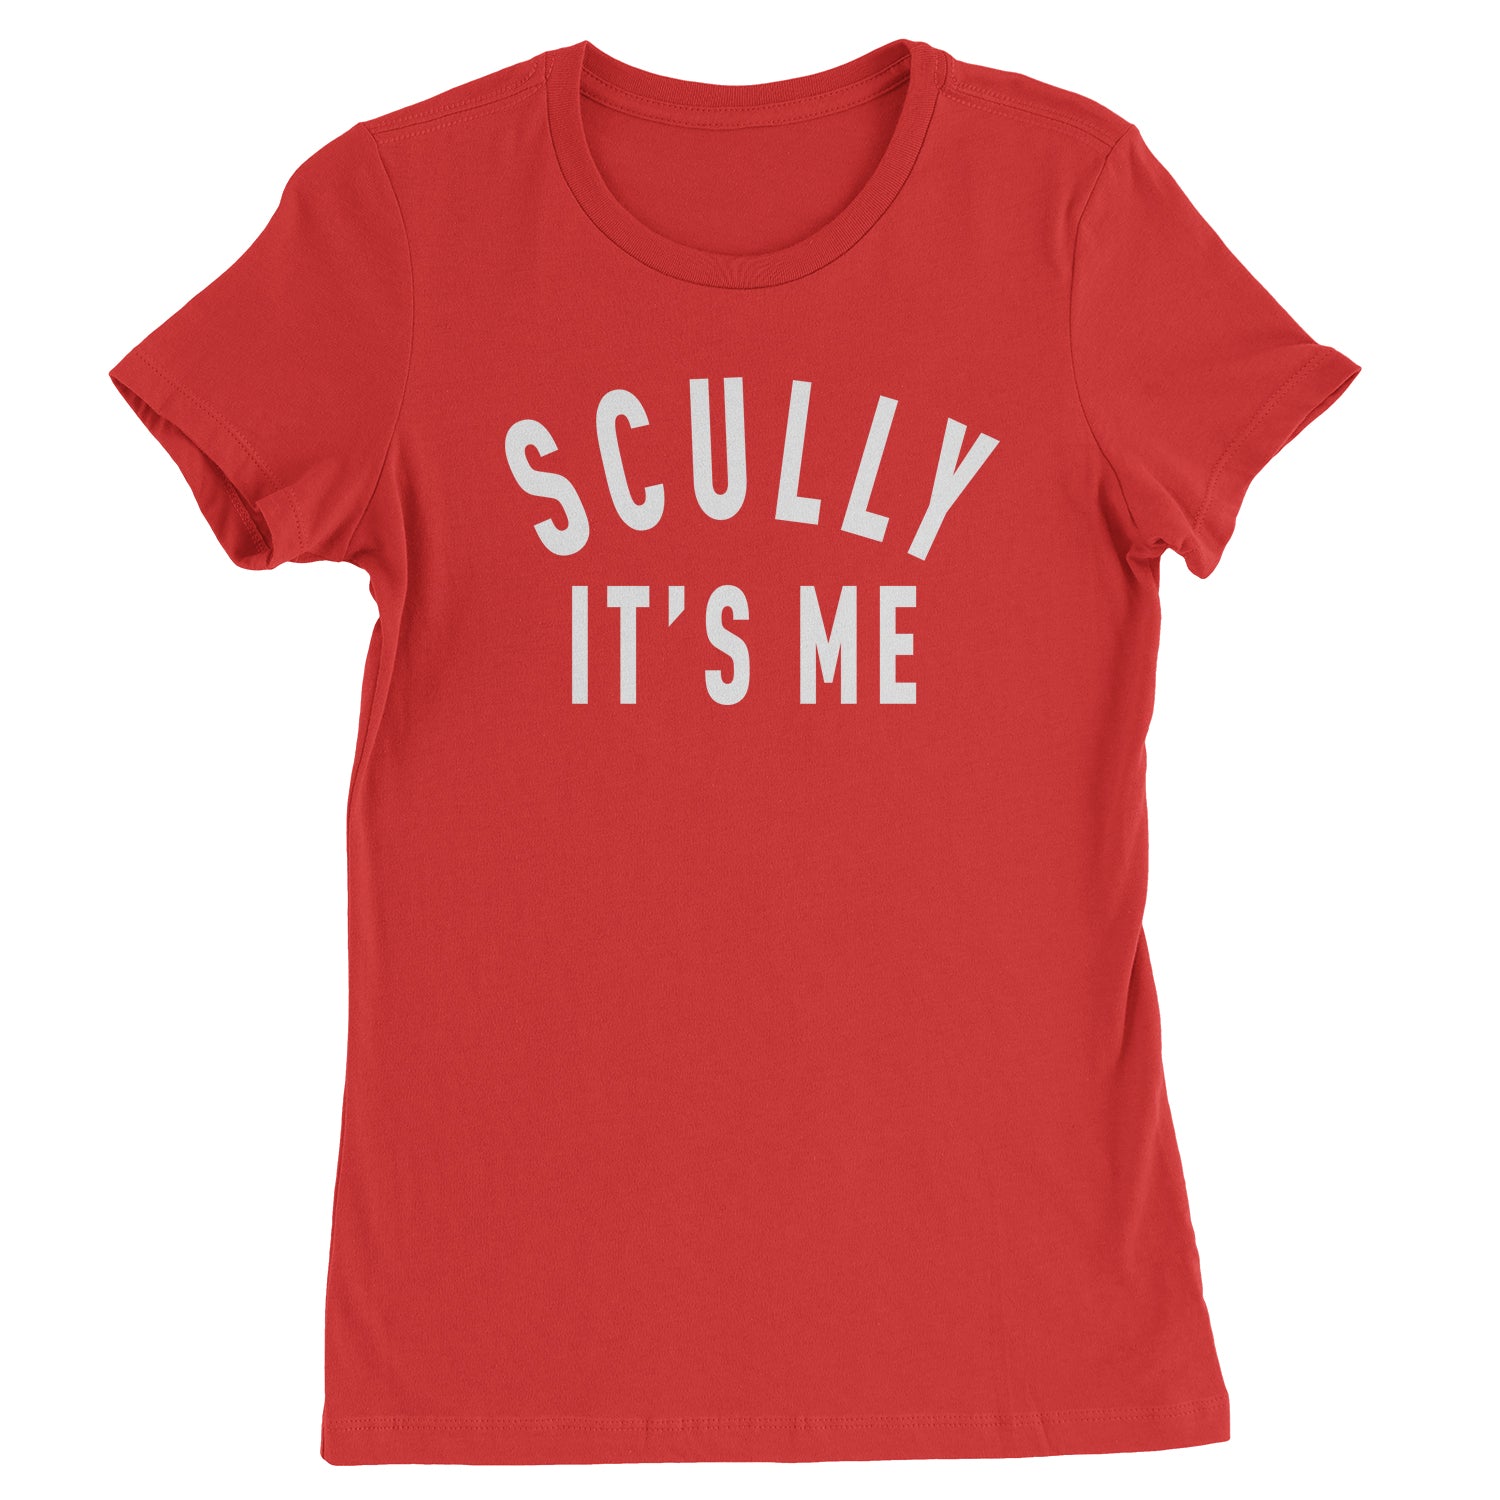 Scully, It's Me Womens T-shirt #expressiontees by Expression Tees